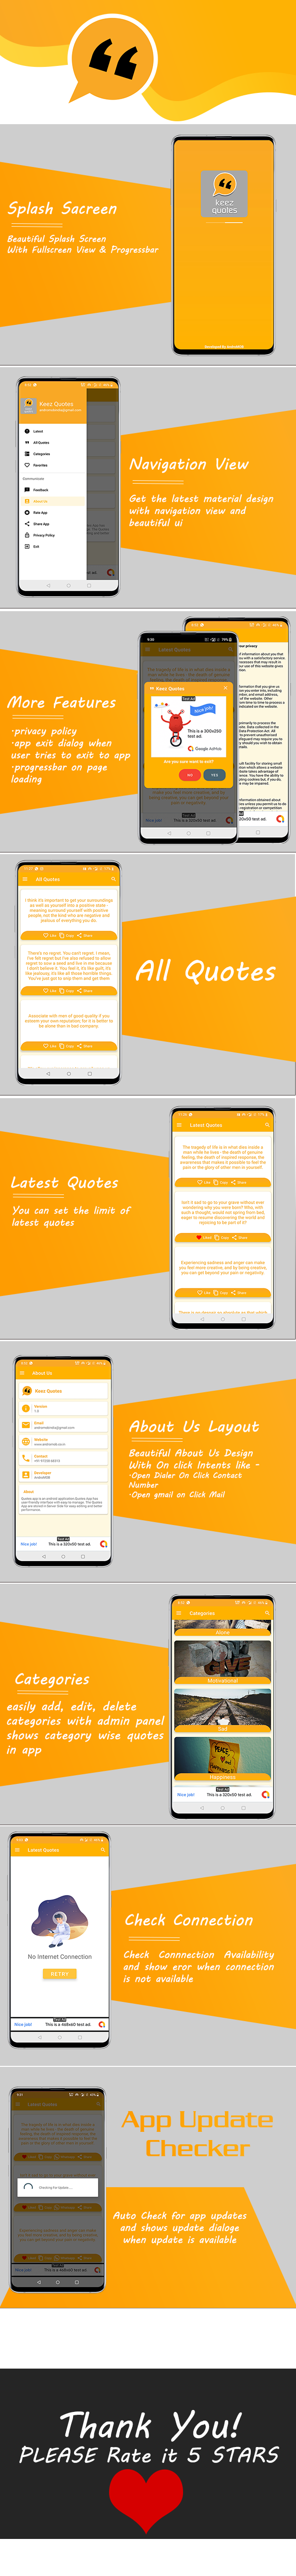 Keez - Android Quotes App WIth Category - Admin Panel - 1